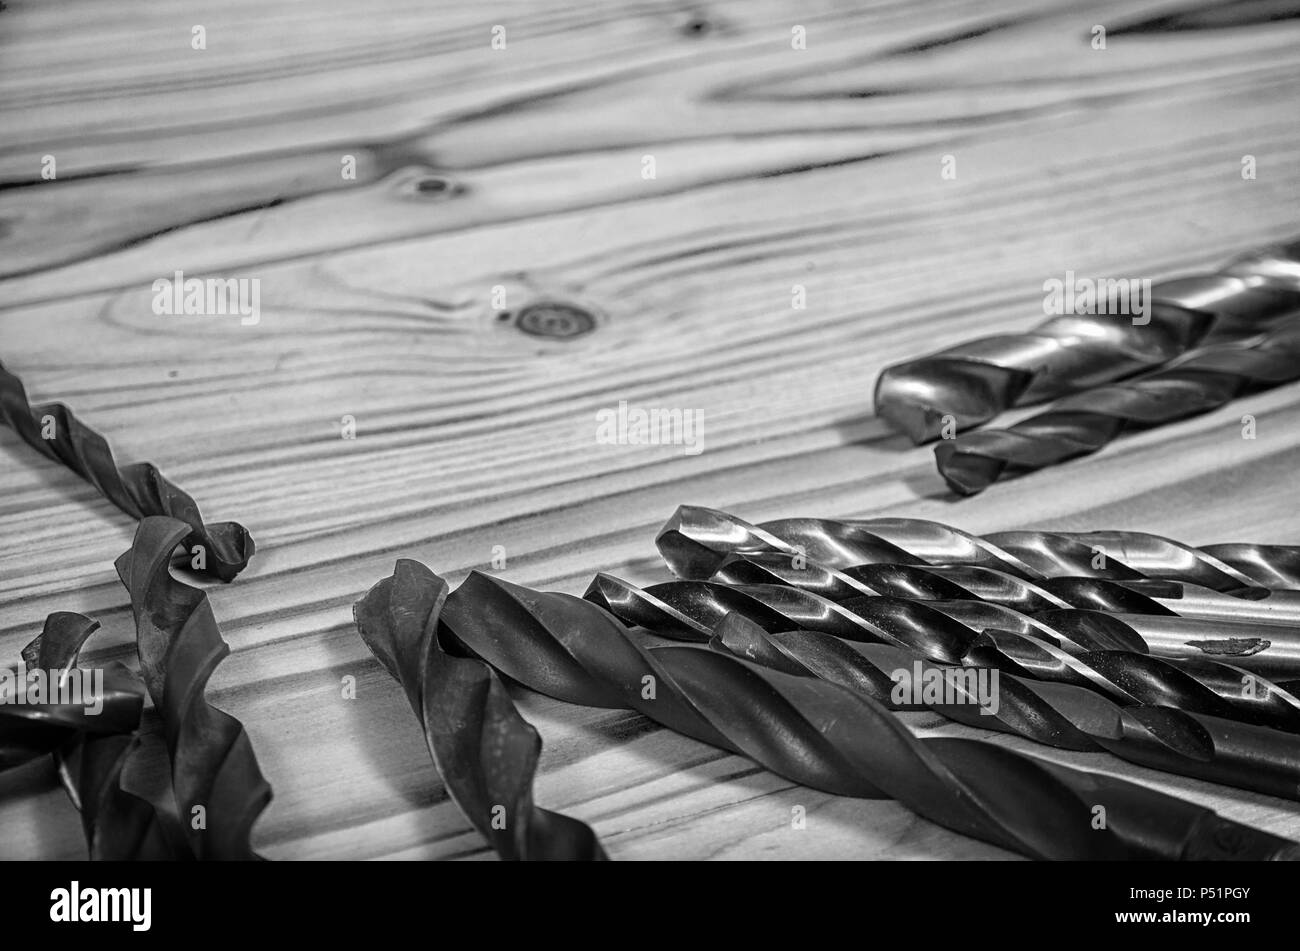 Drills on a wooden table in black and white. Stock Photo